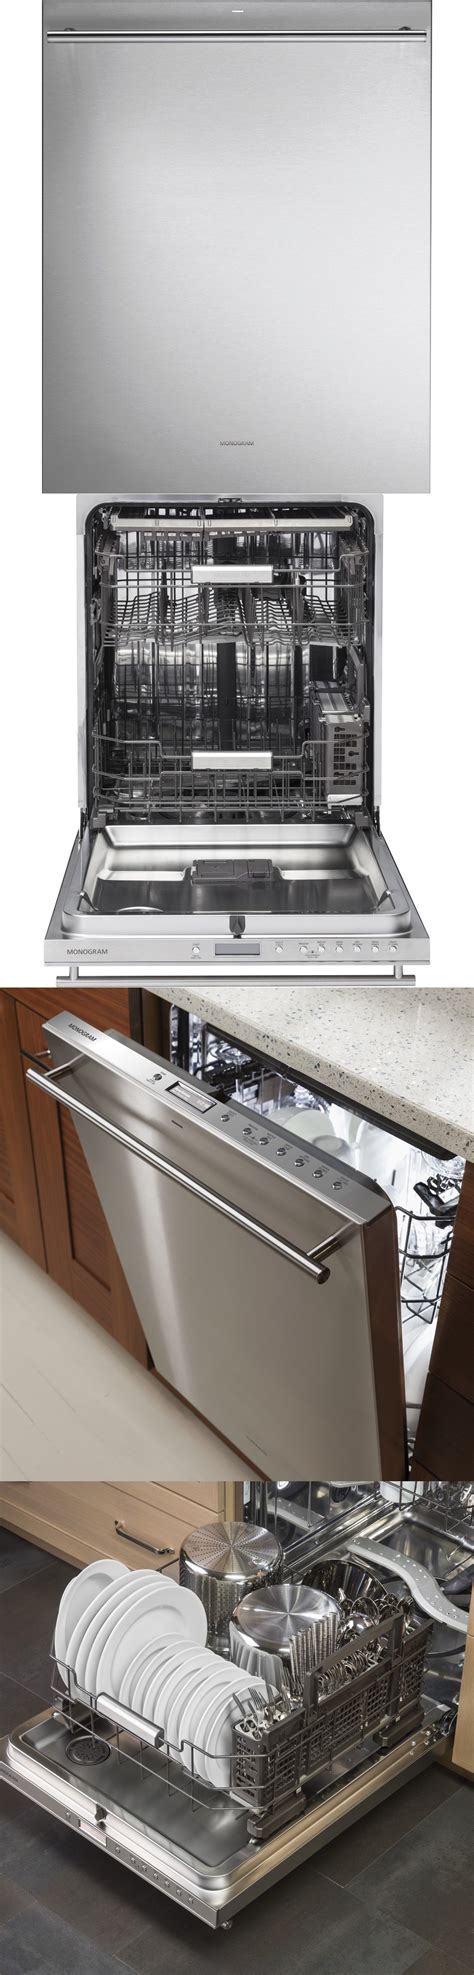 Ge Monogram 24 Built In Fully Integrated Dishwasher Stainless